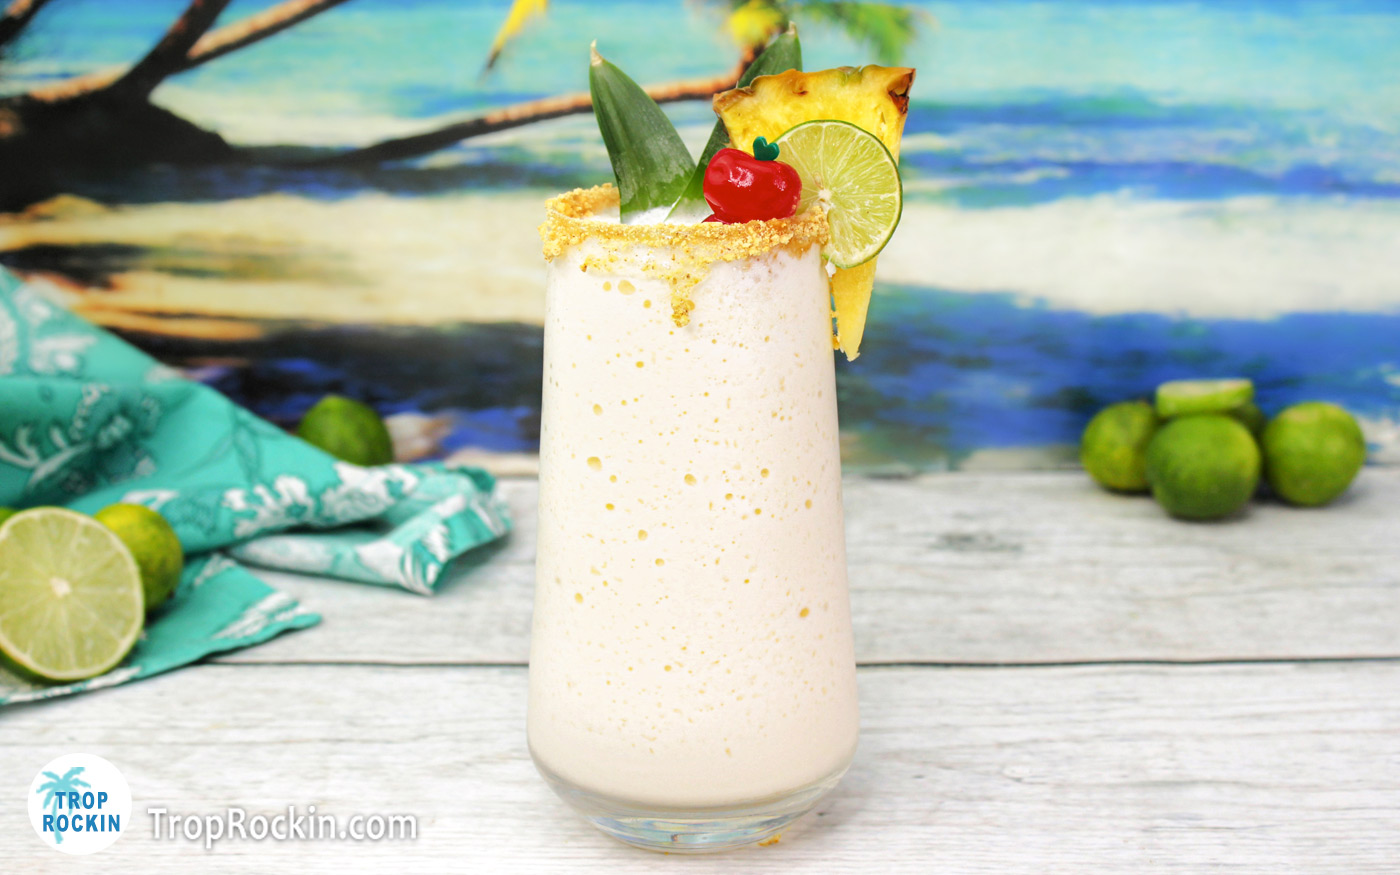 Key Lime Colada: Creamy white frozen drink with a pineapple slice, maraschino cherry, lime wheel and pineapple leaves for garnish. Graham cracker crumbs on the rim of the glass while sitting on a white wood counter top with a tropical beach background.